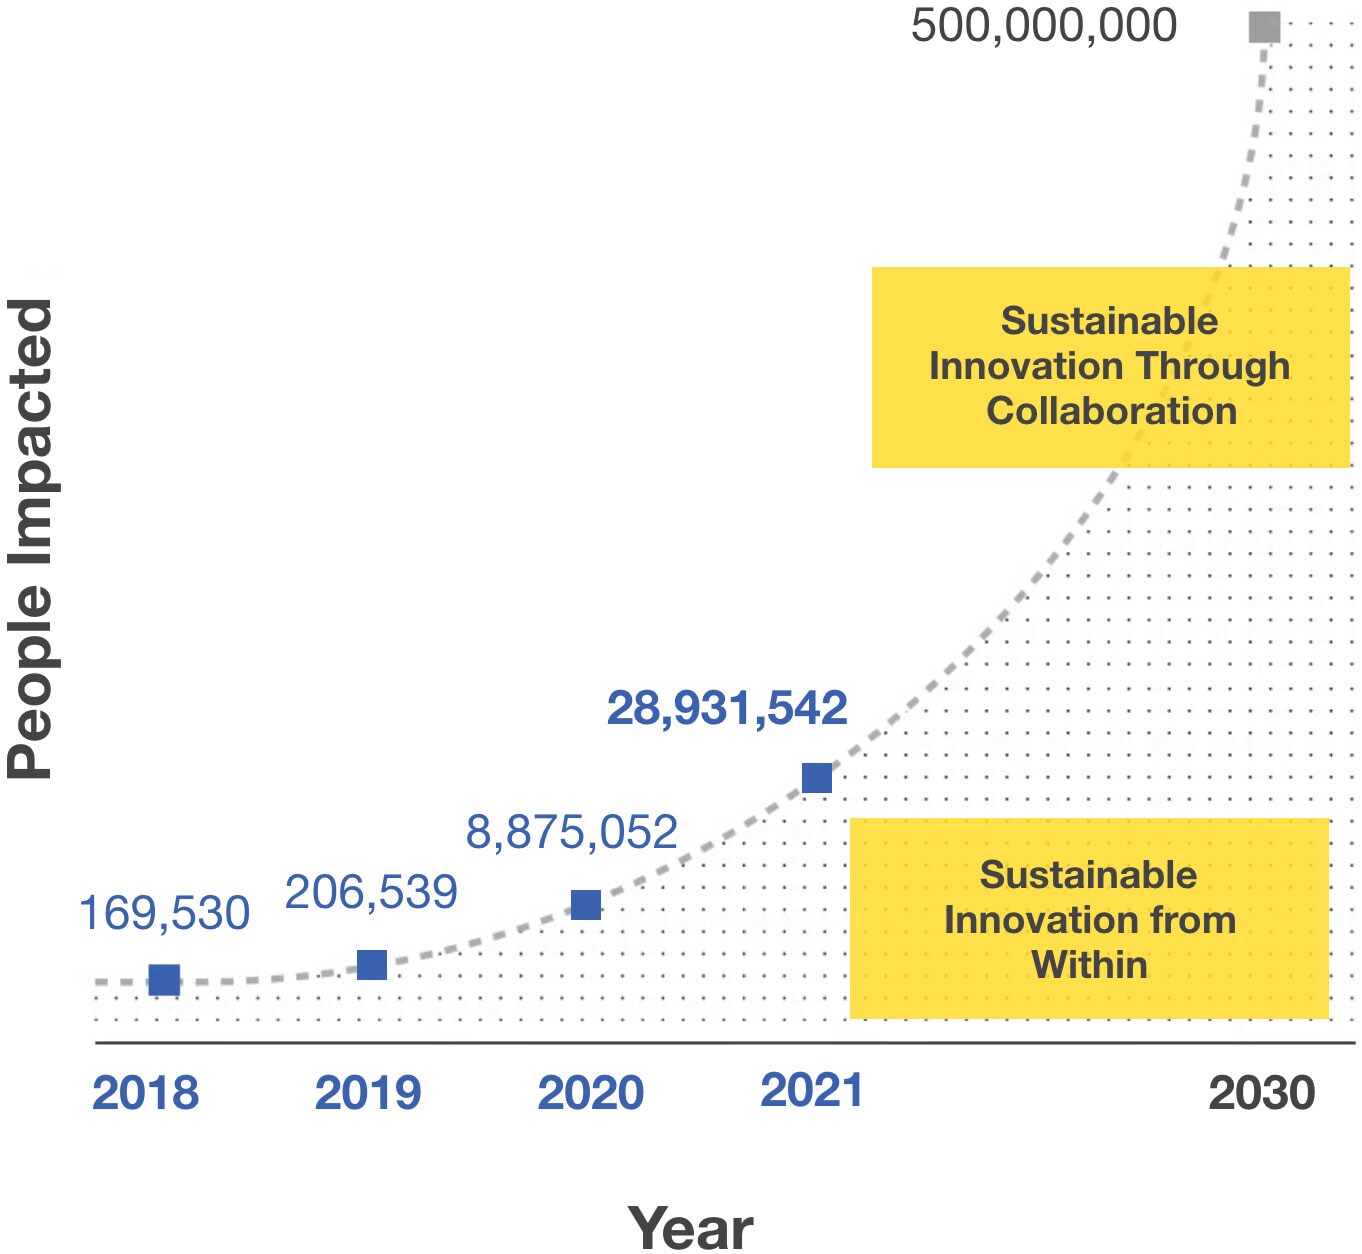 Projected number of sustainable innovation through collaboration since 2018